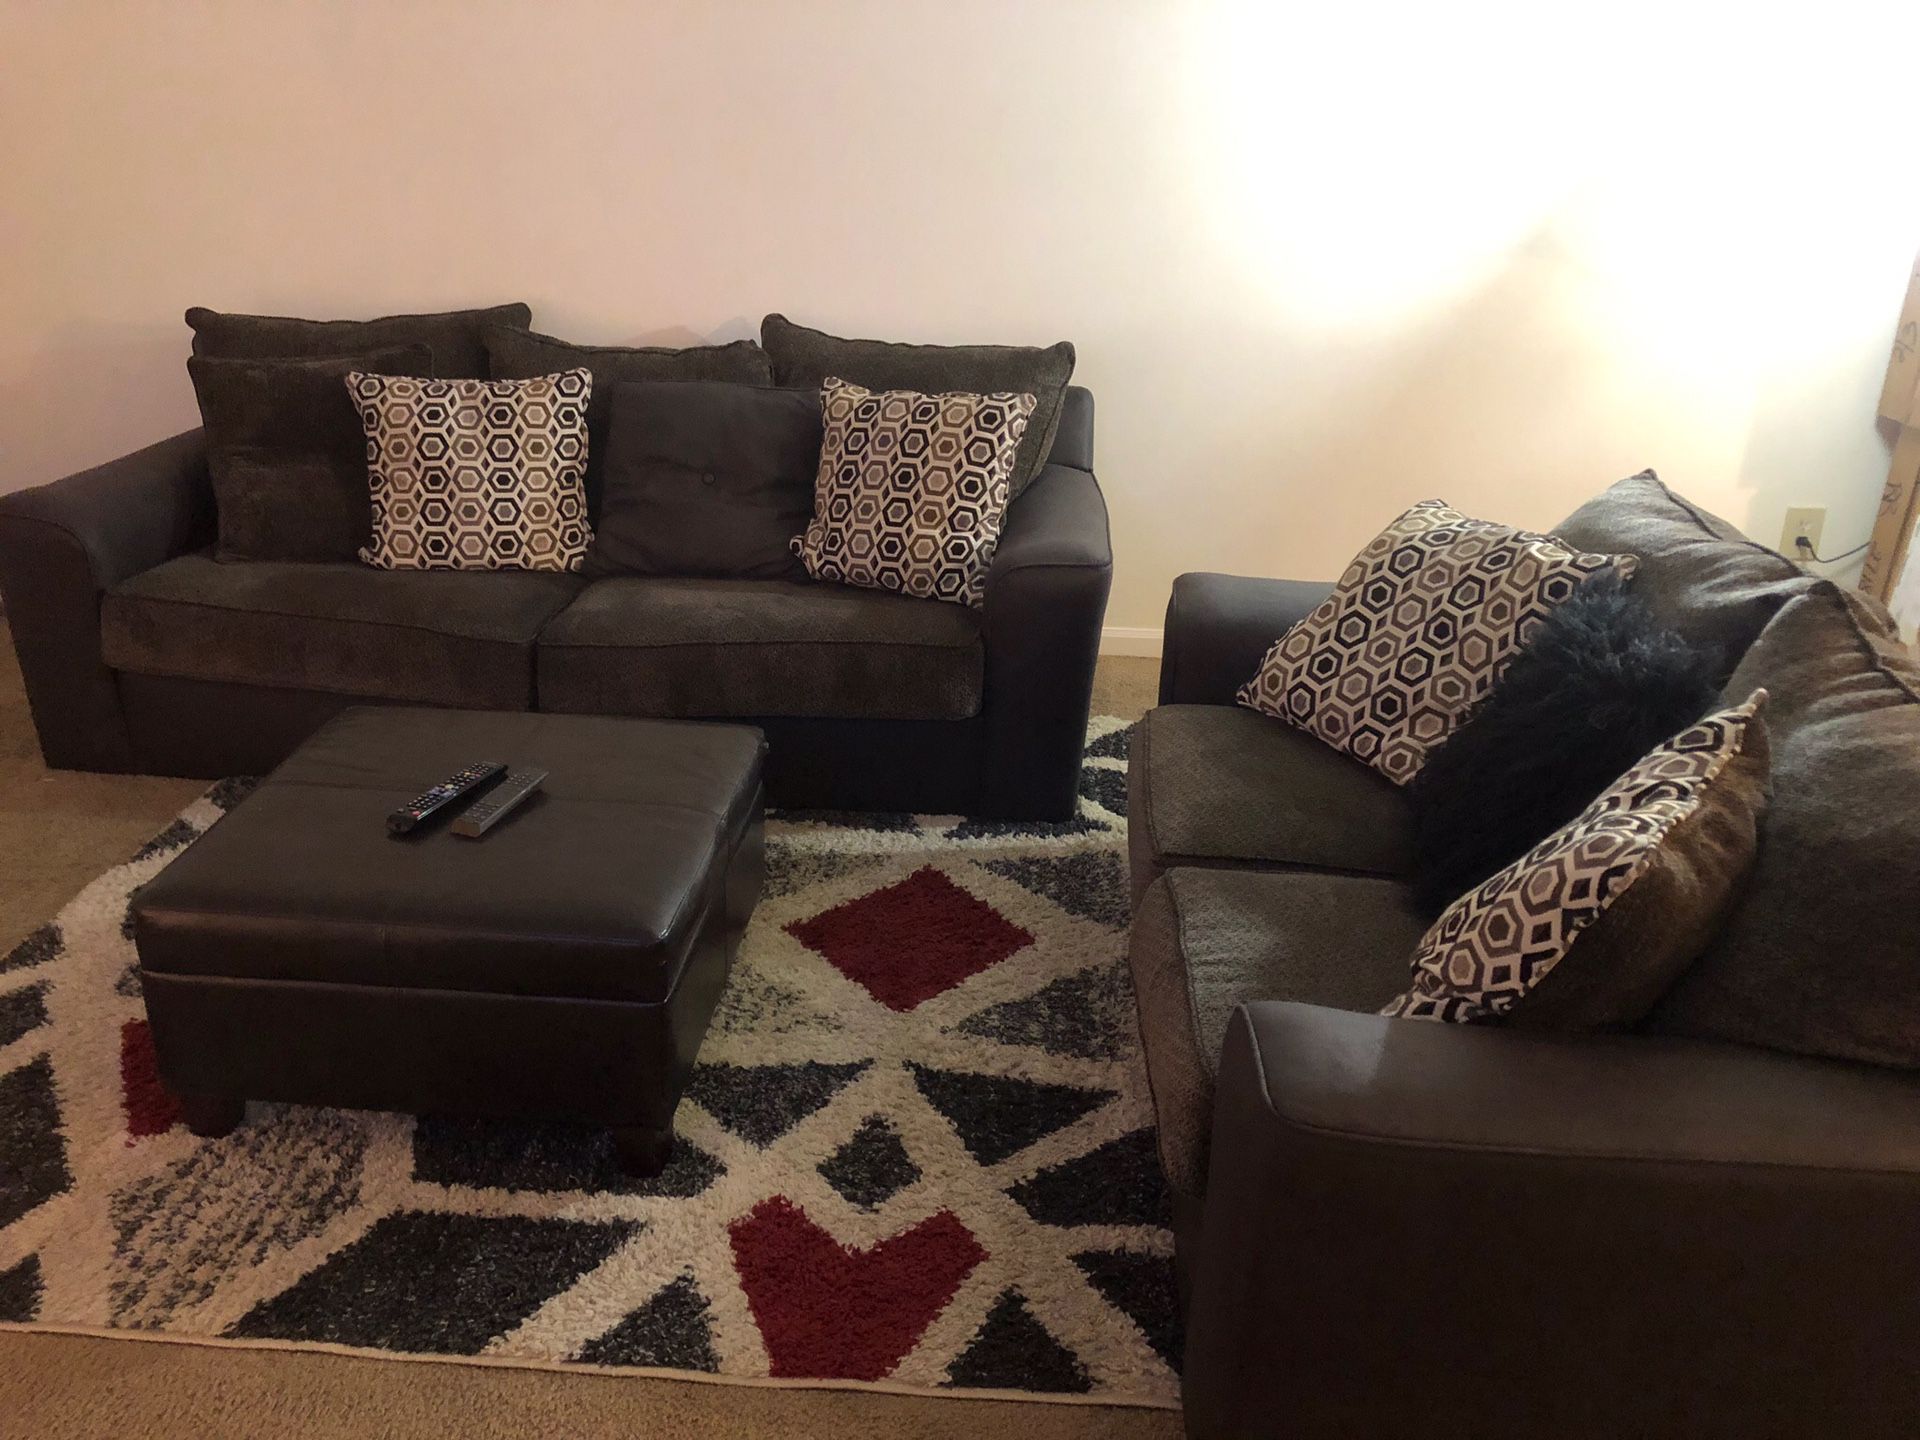 Living Room Furniture Has to Go!